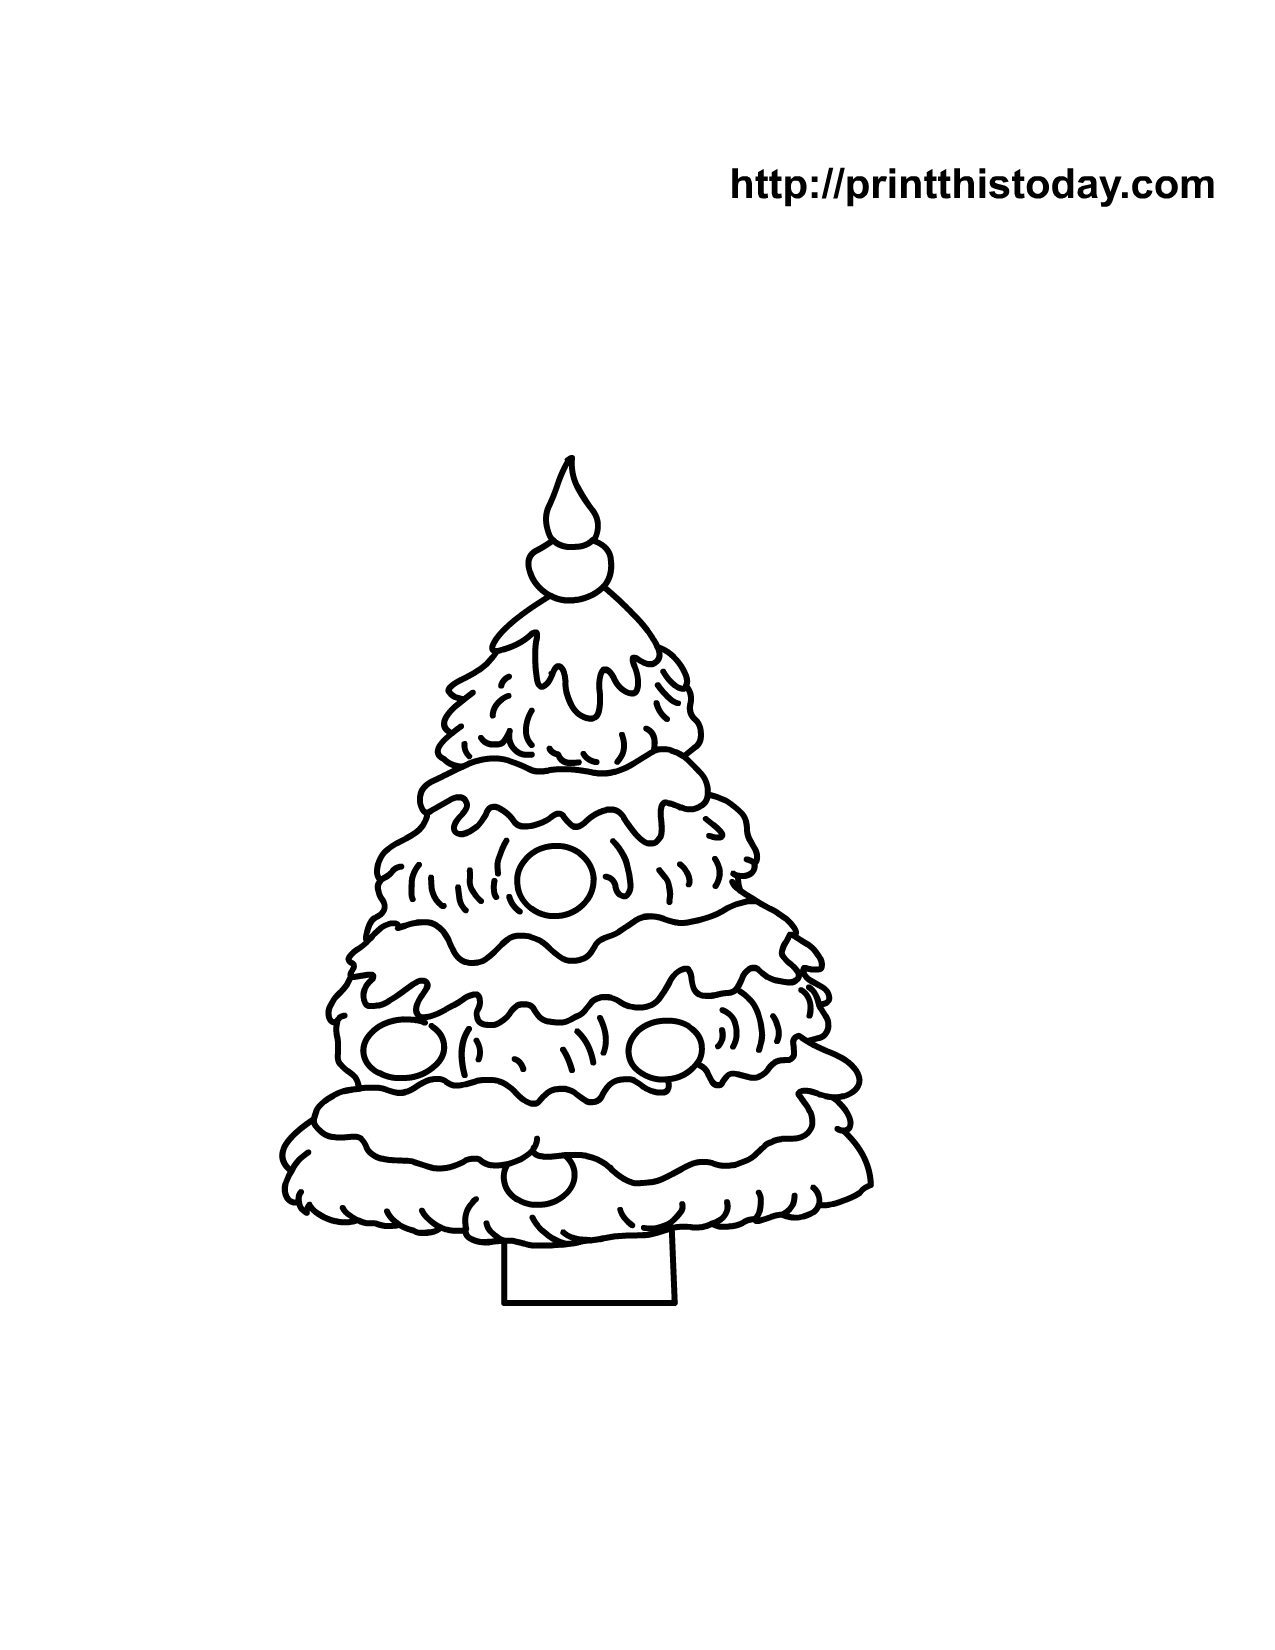  Christmas tree coloring pages – coloring book – #12